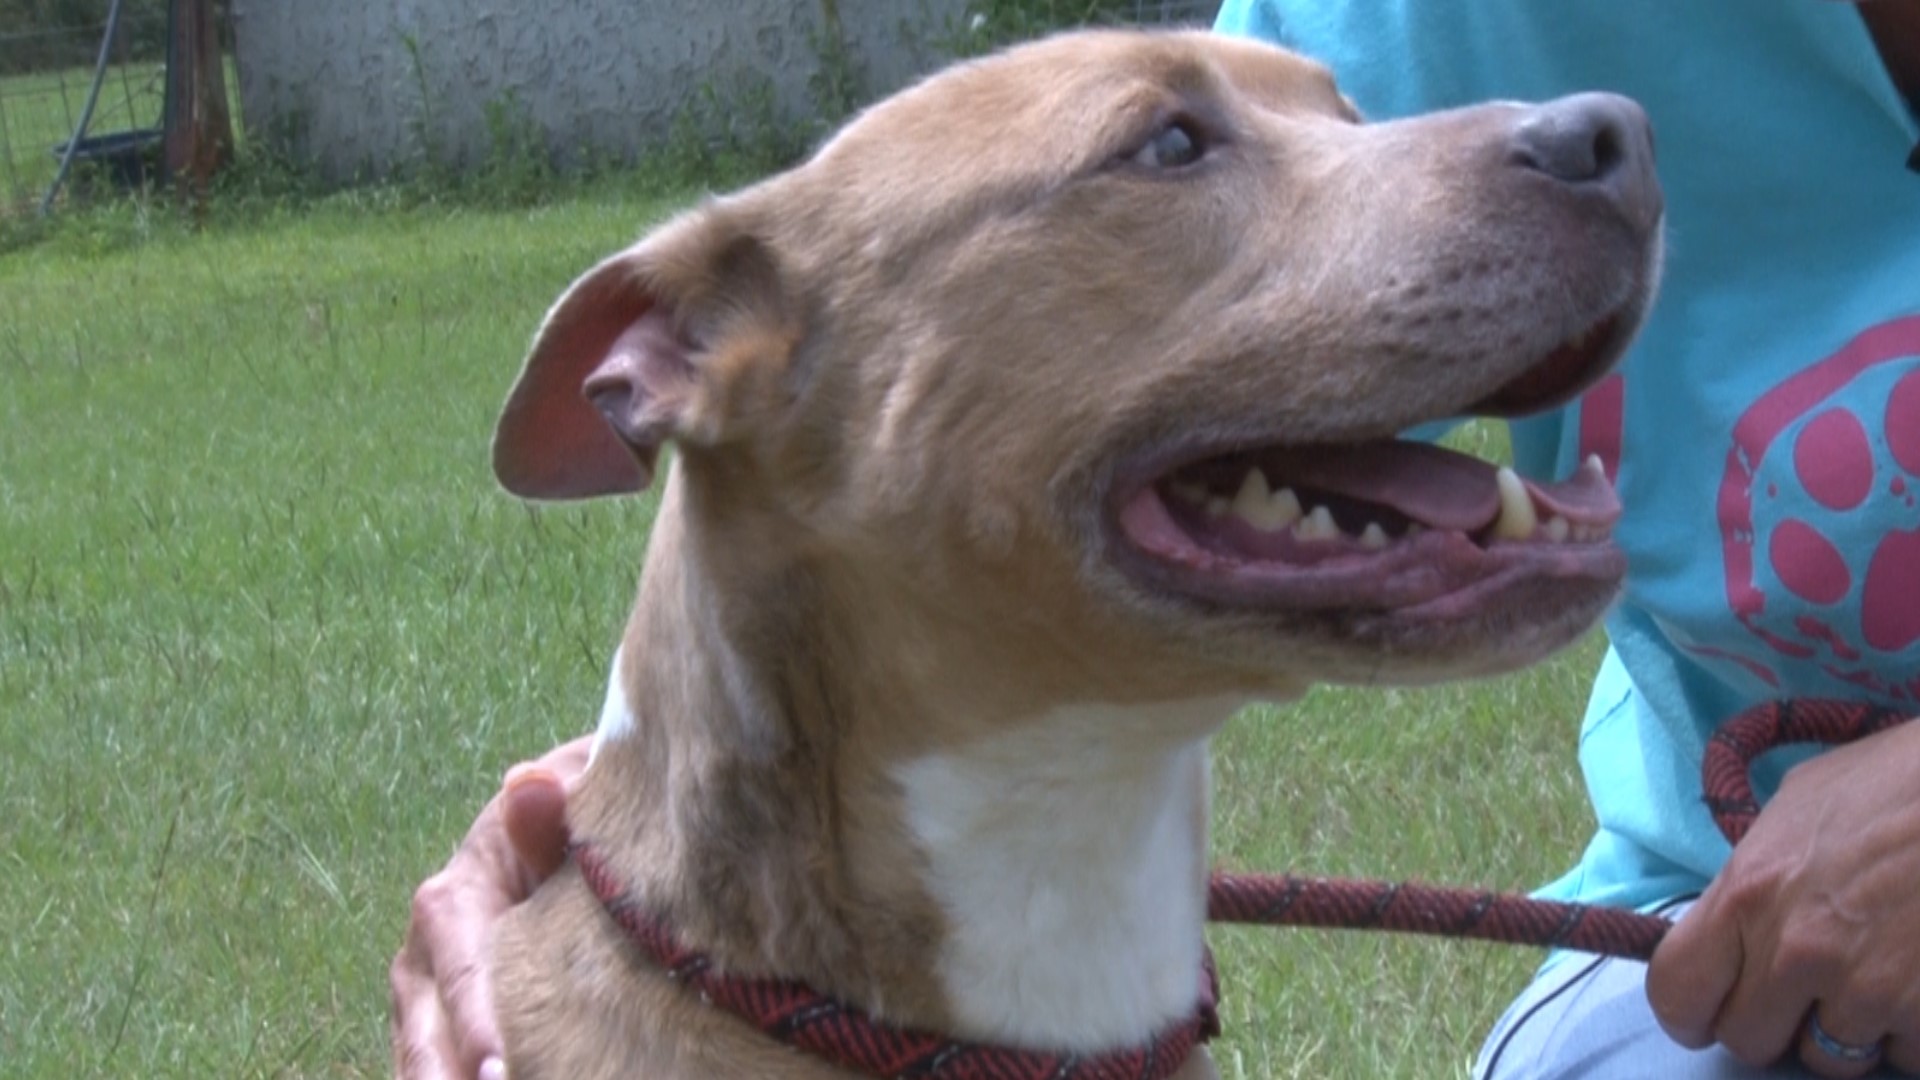 An animal rescue center in Peach County is shutting down after more than a decade of helping dogs.